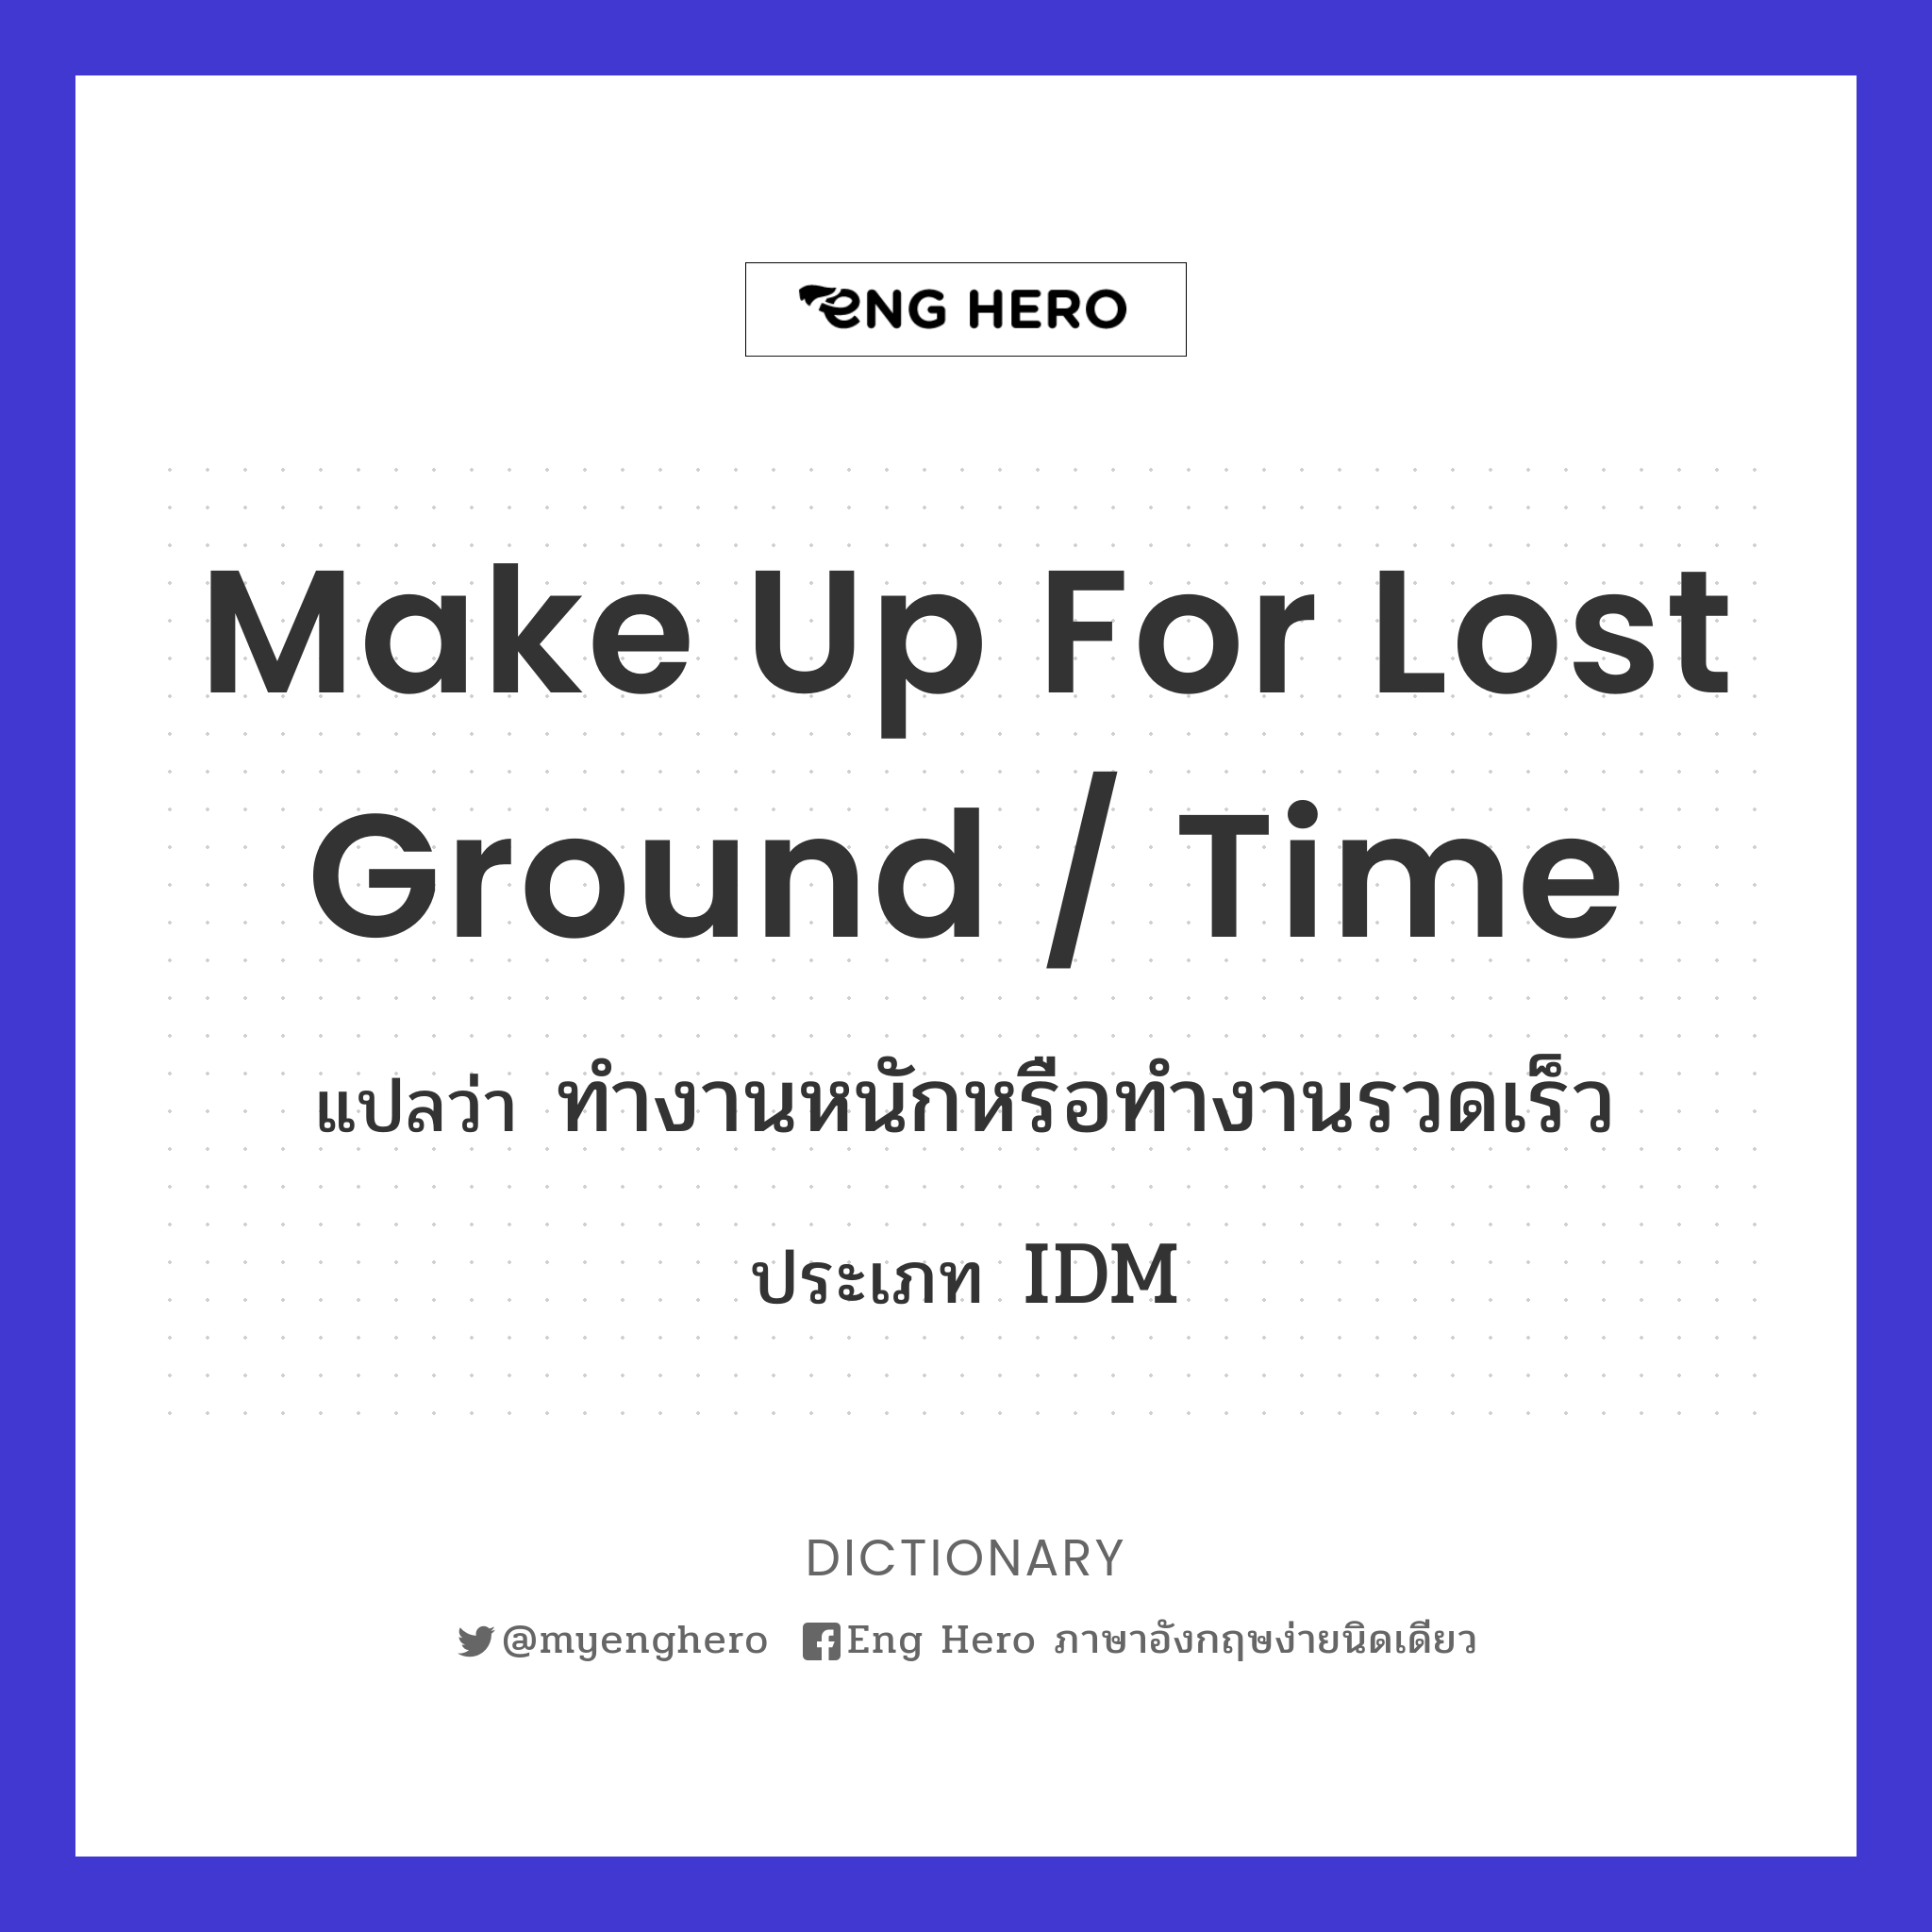 make up for lost ground / time